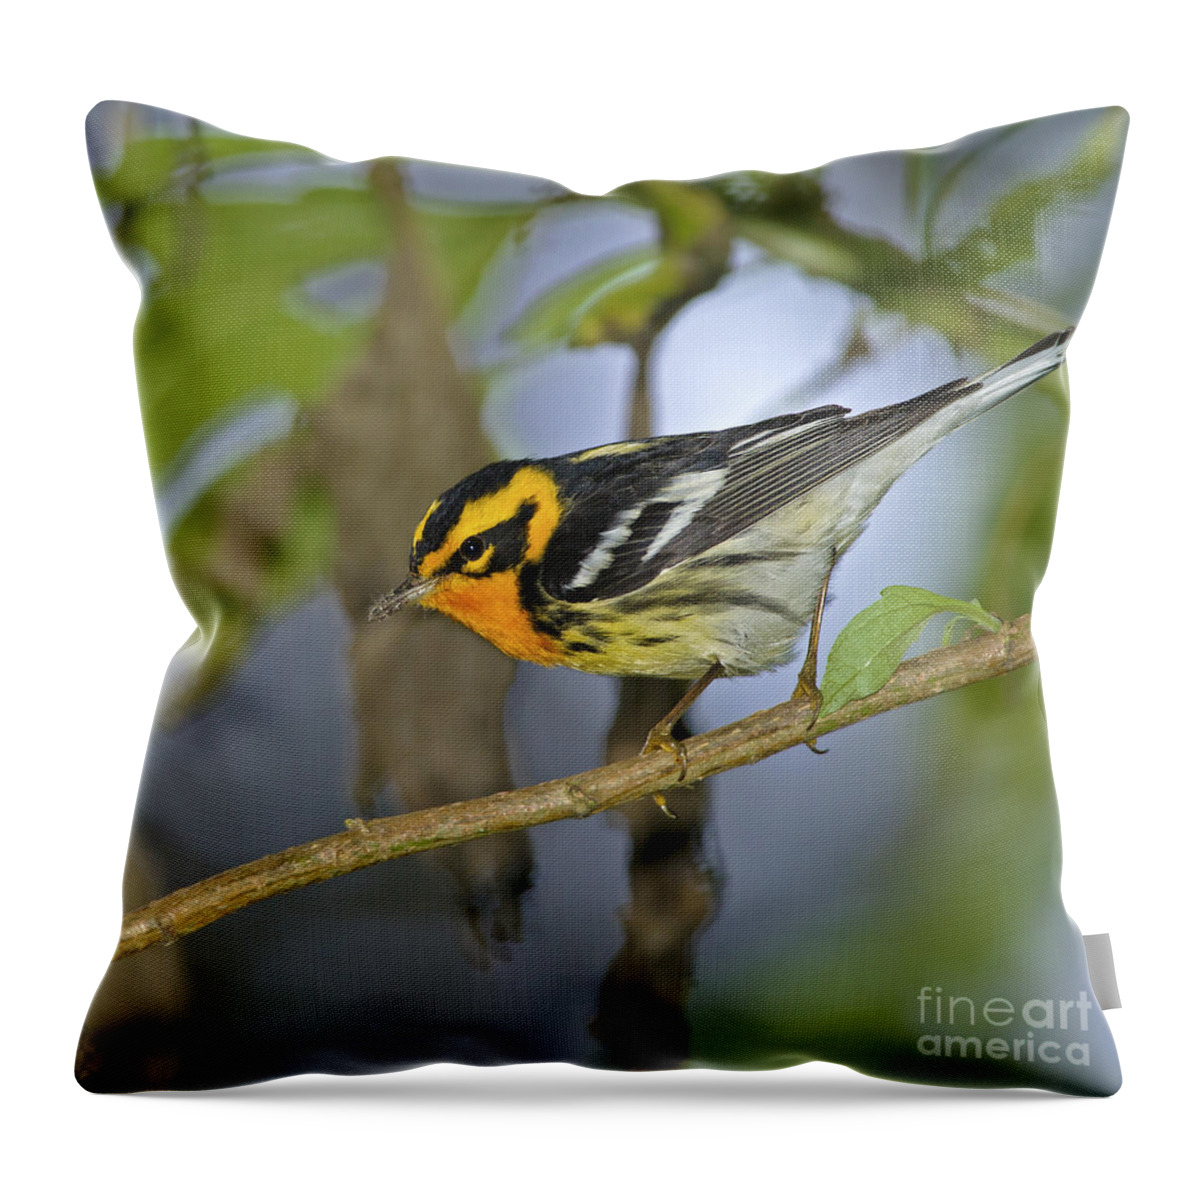 Festblues Throw Pillow featuring the photograph EyeCandy... by Nina Stavlund